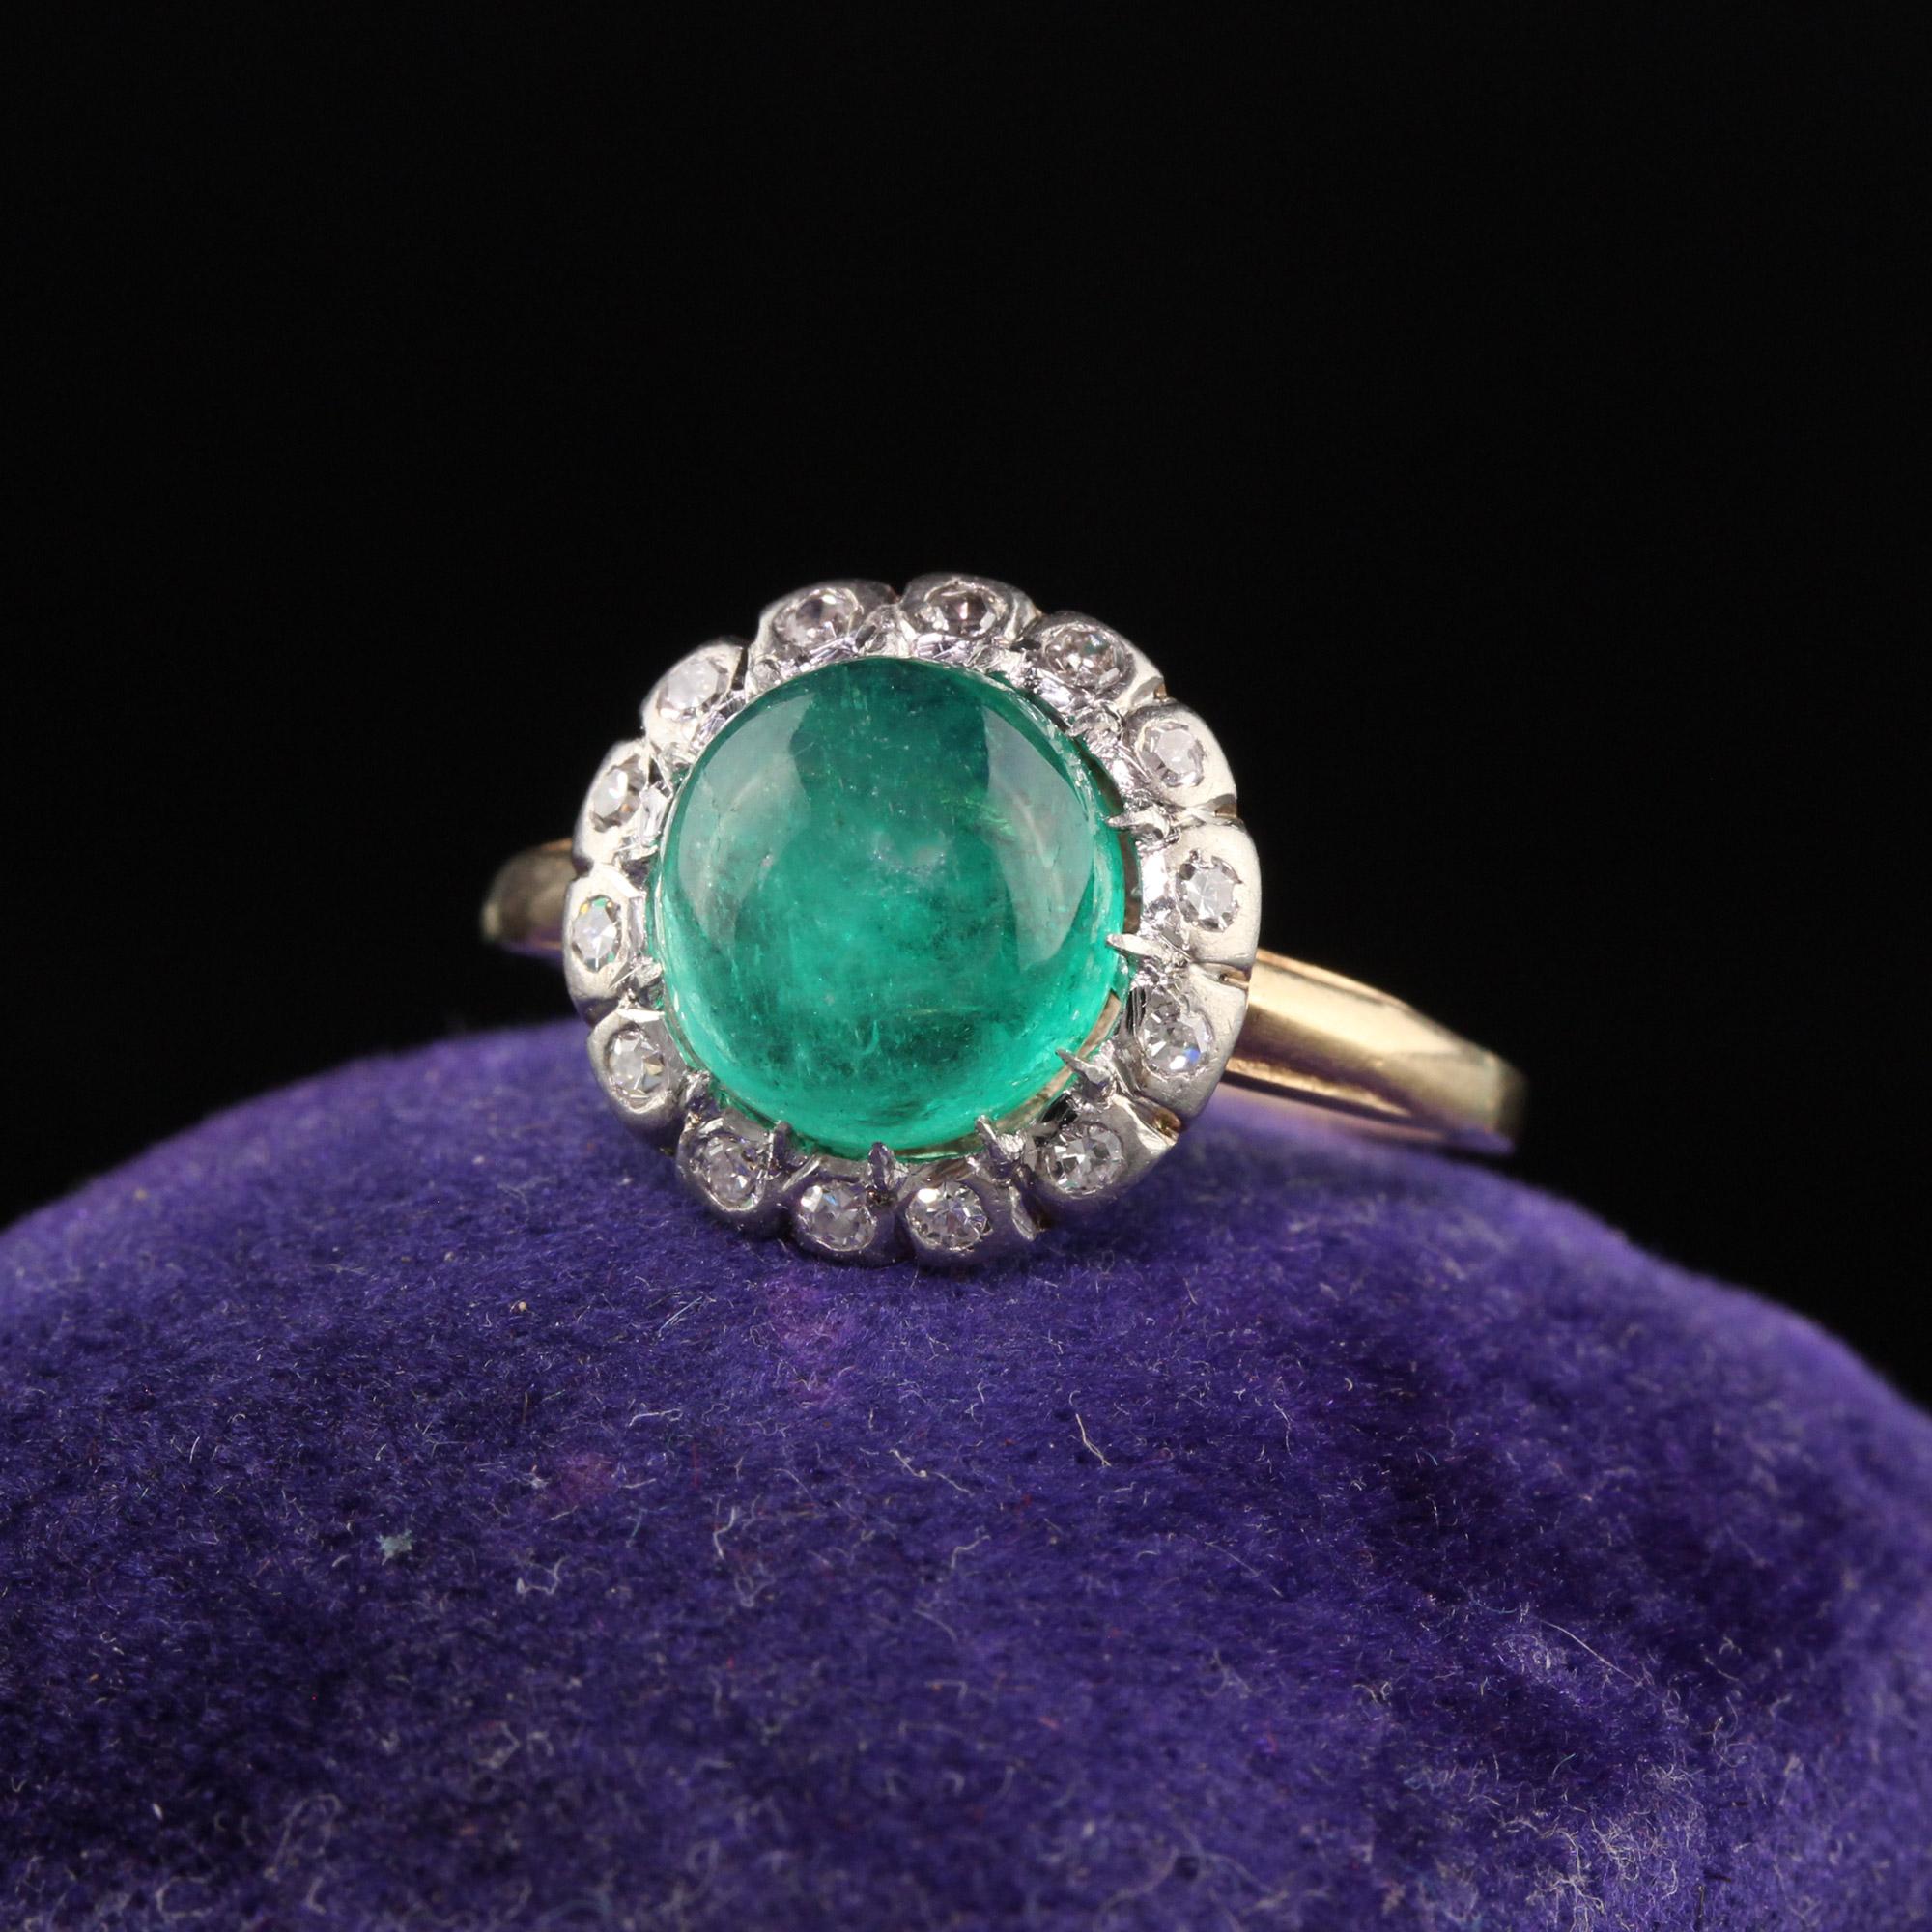 Beautiful Antique Edwardian 14K Yellow Gold Platinum Top Colombian Emerald Engagement Ring. This gorgeous ring is crafted in 14k yellow gold and platinum top. The center holds a beautiful green Colombian cabochon emerald surrounded by old cut